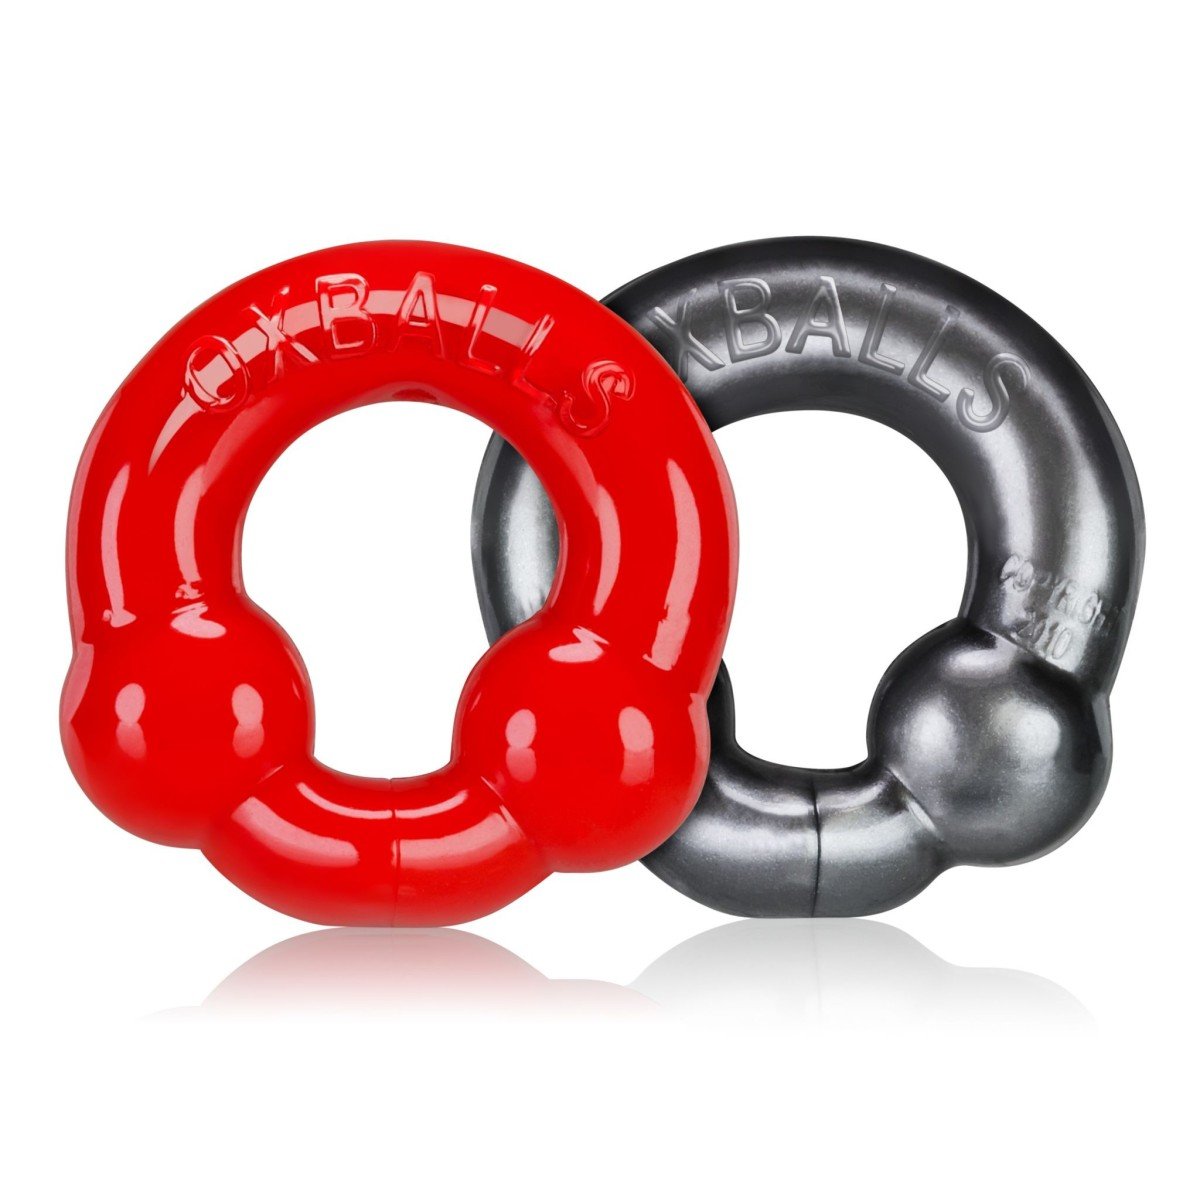 Oxballs Ultraballs Cock Rings Silver Steel and Red